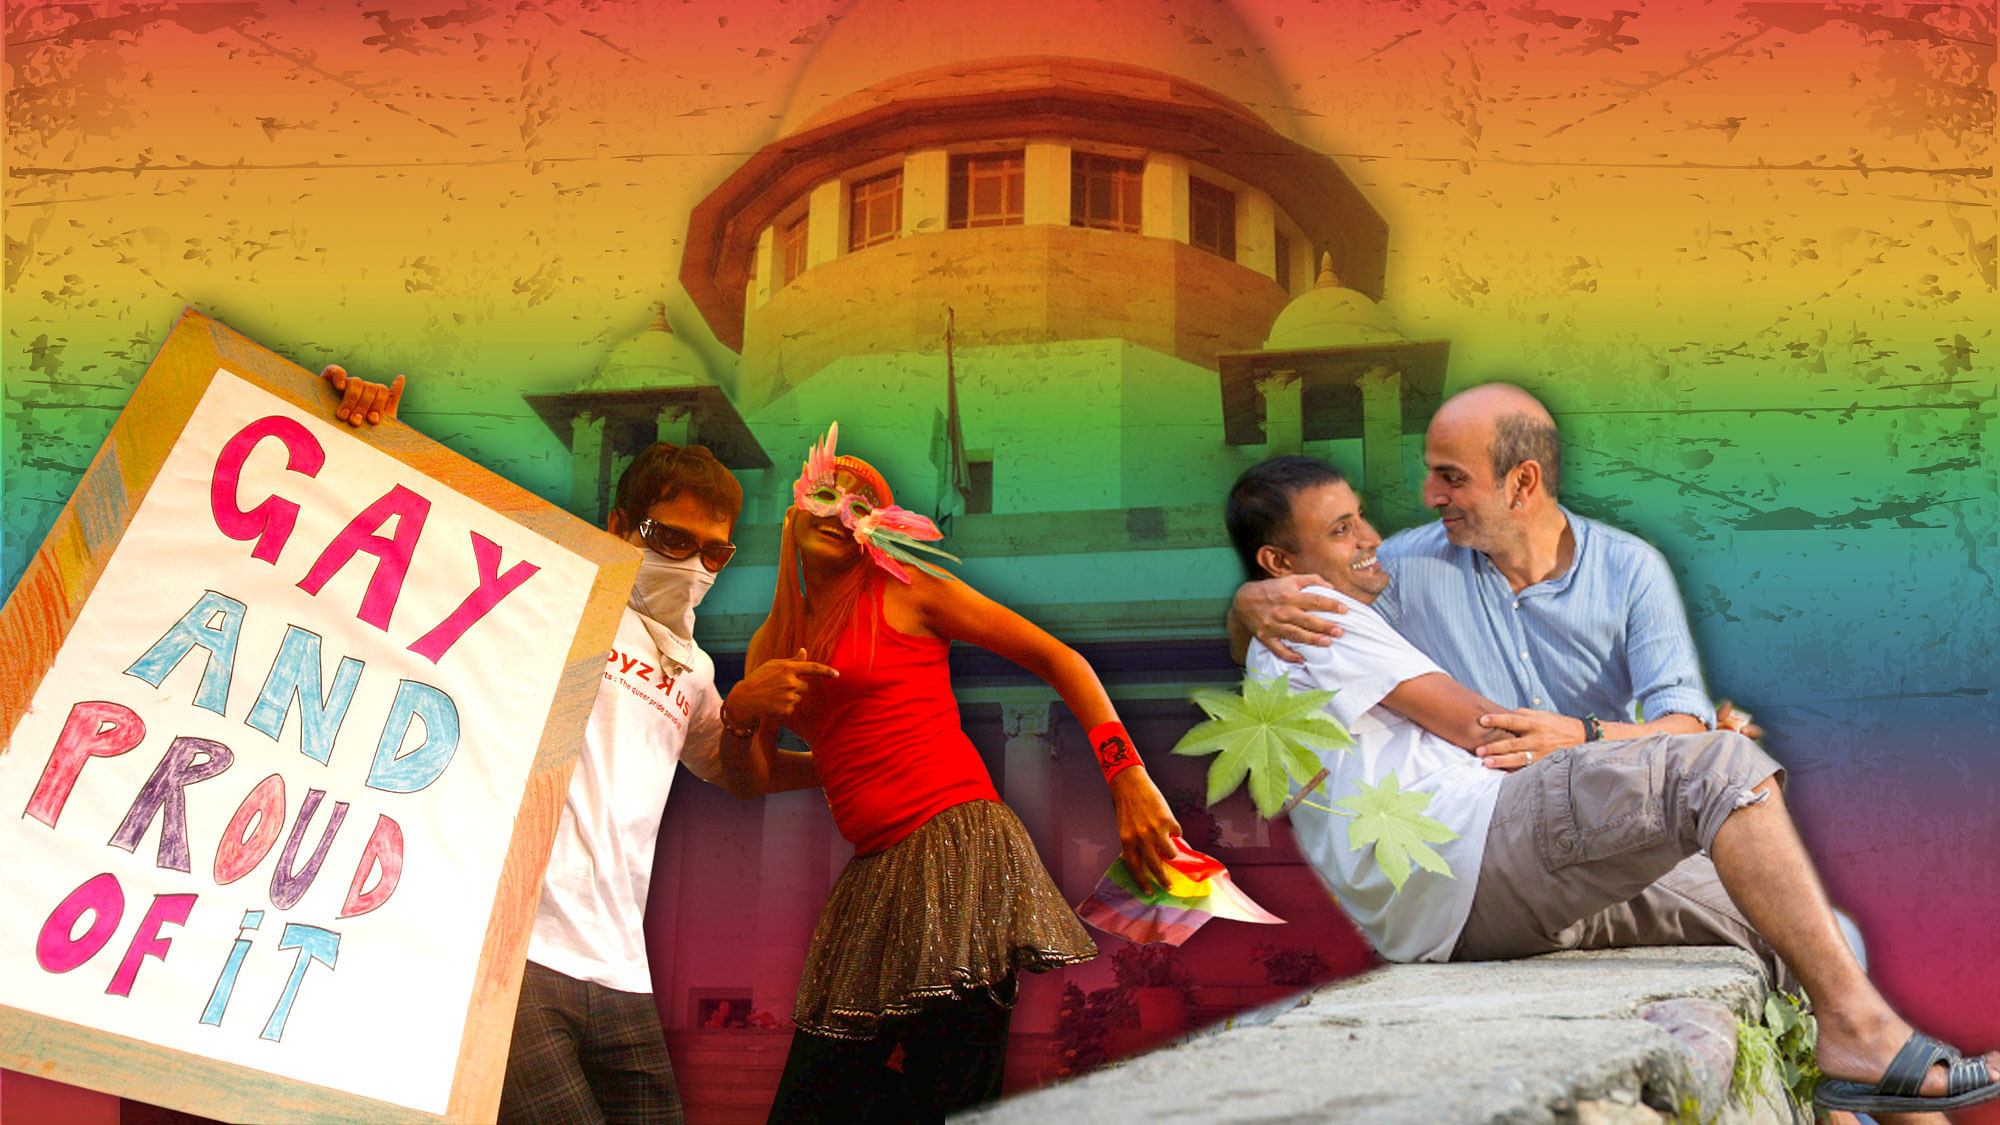 Section 377 was not struck down, but read down by the Supreme Court on 6 September 2018.&nbsp;